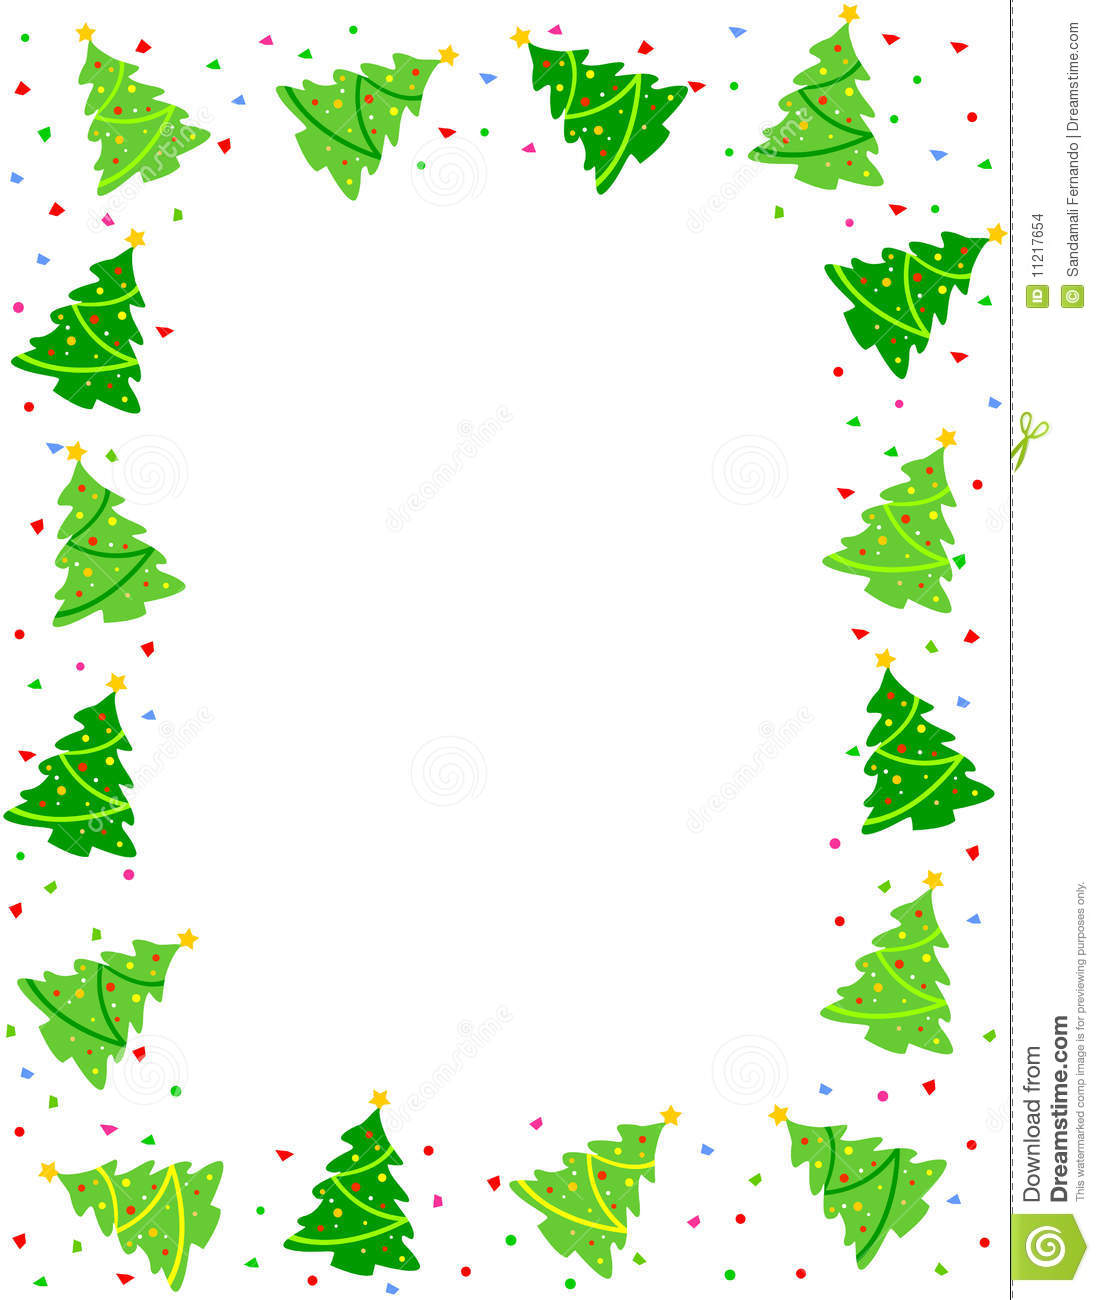 Christmas Tree Borders Clip Art Images   Pictures   Becuo